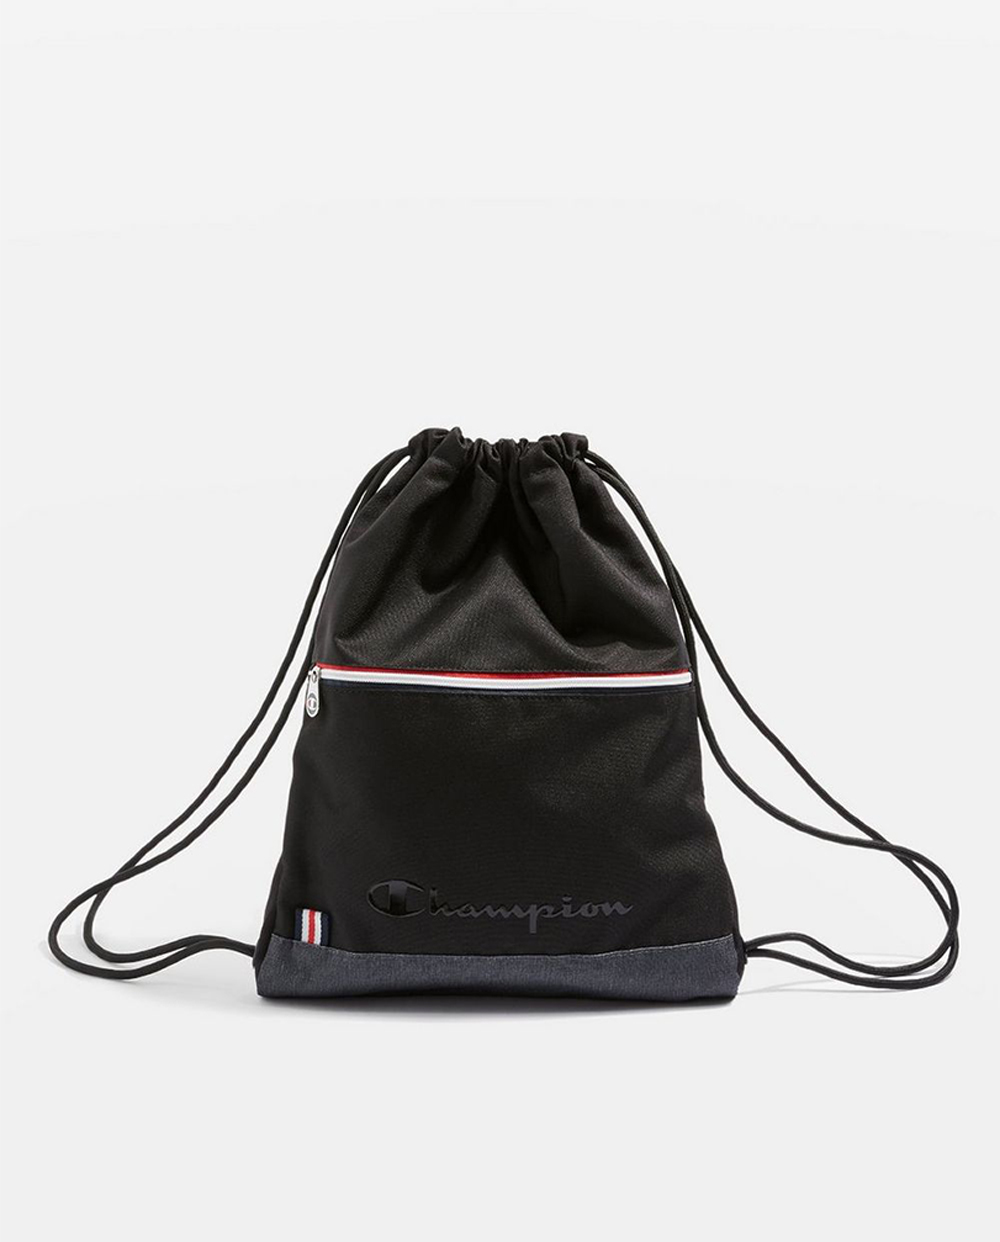 30+ Items We Can't Believe Are On Sale Right Now And We're #AddingToCart | Champion Drawstring Backpack, £15 (was £20) from Topshop